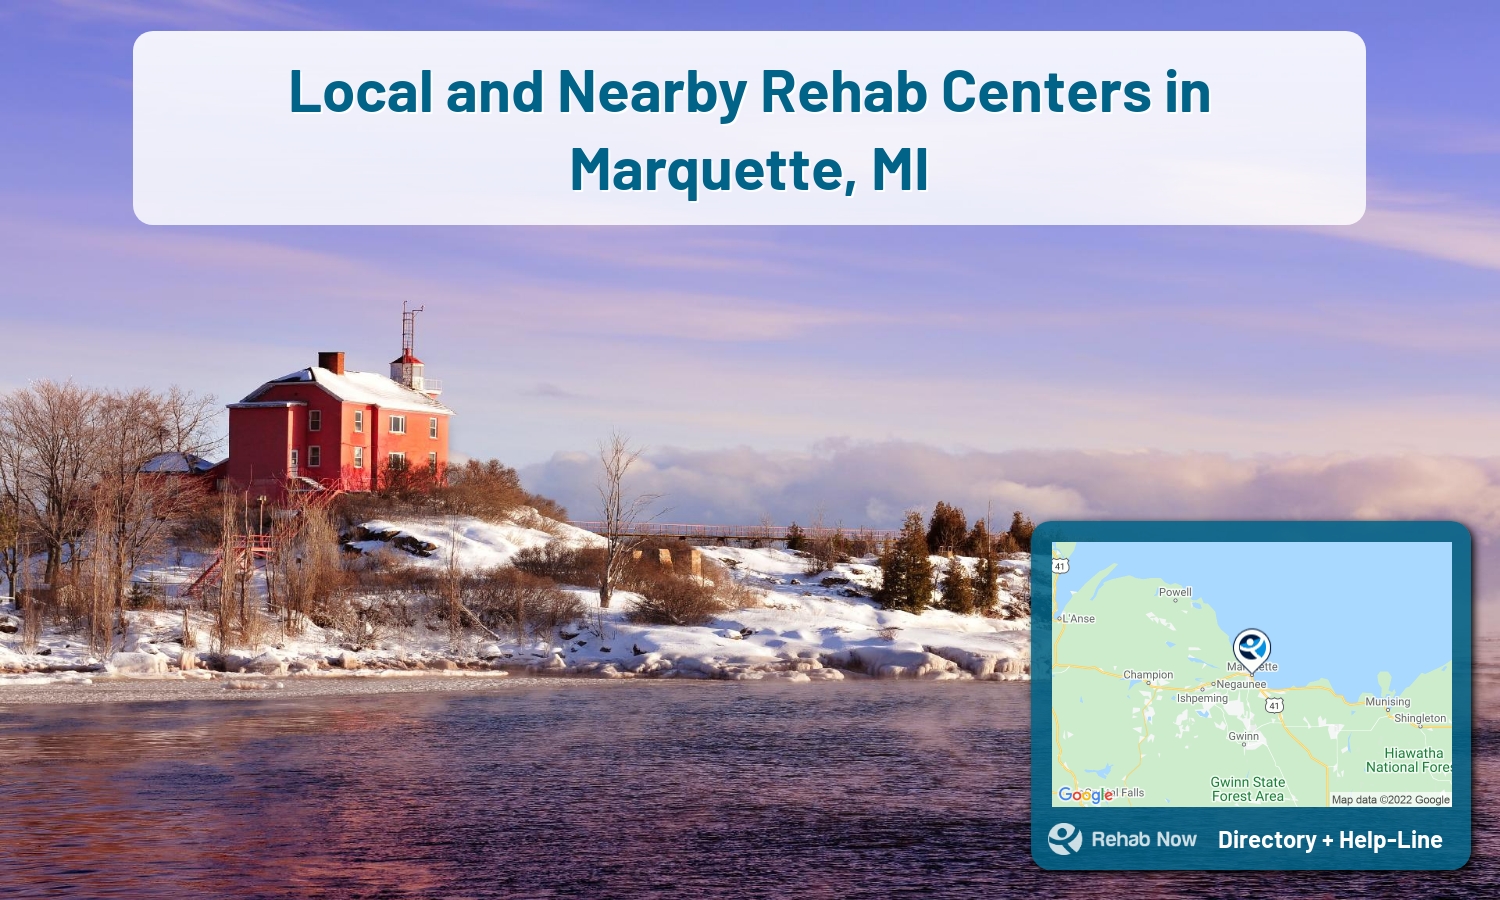 List of alcohol and drug treatment centers near you in Marquette, Michigan. Research certifications, programs, methods, pricing, and more.